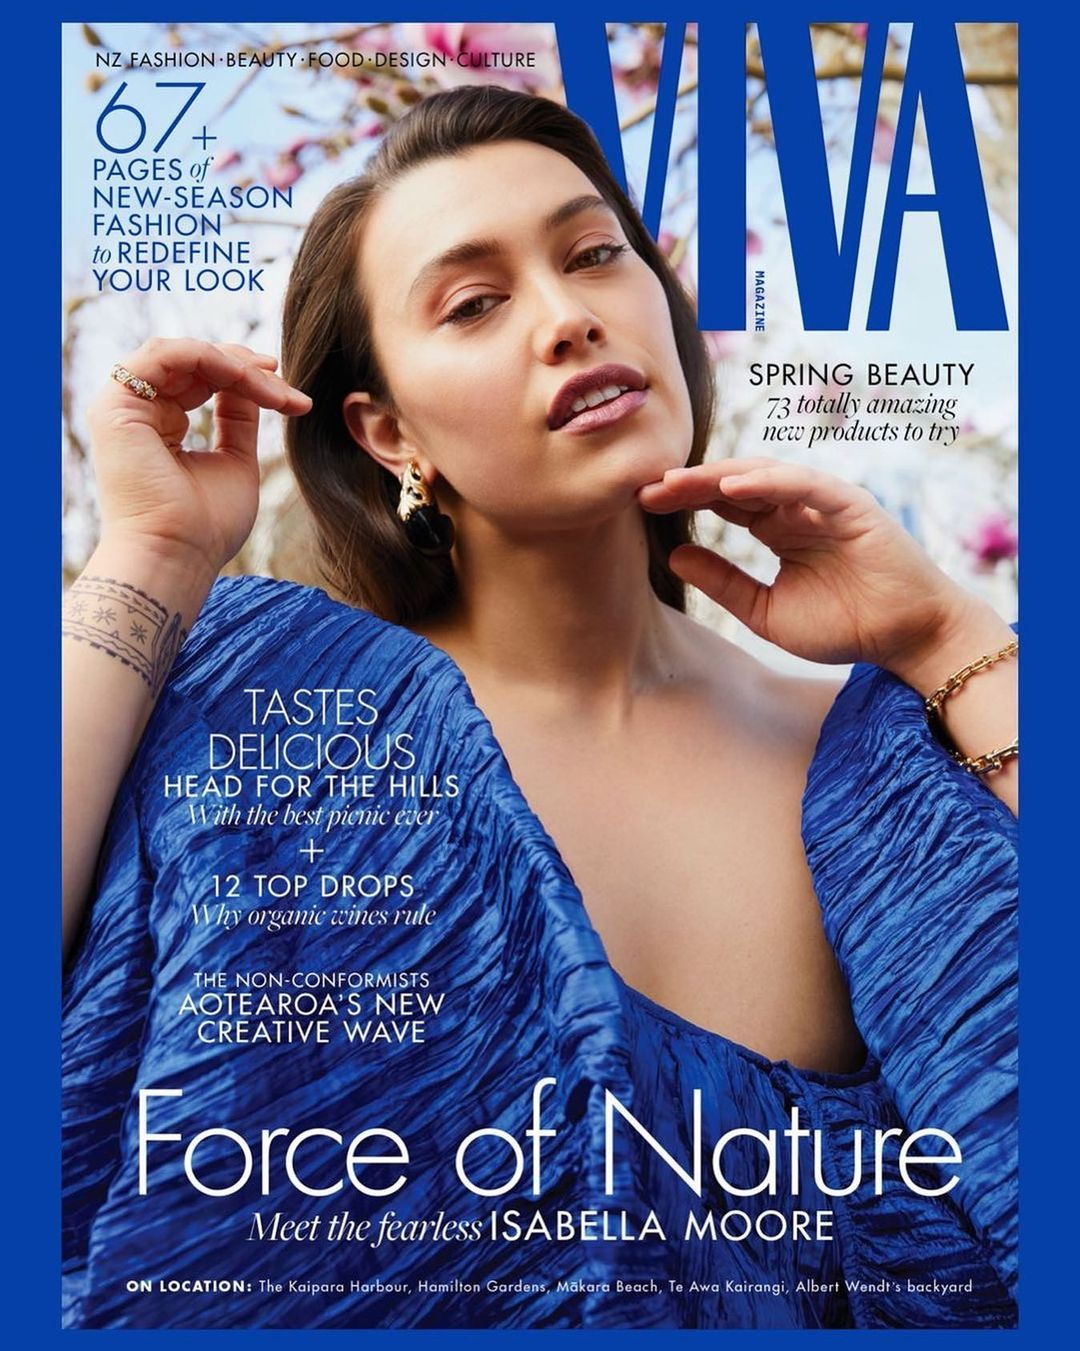 #Force of Nature #ISABELLA covers Viva Glossy Spring Issue  Photographed by Mara Sommer wearing a design by  Havilah Arendse @havilah.label Fashion & Concept by Dan Ahwa Hair by @seanpatrickmahoney & make up by @geegee_makeupartist  writing @amanda_linnell , Viva Editor.